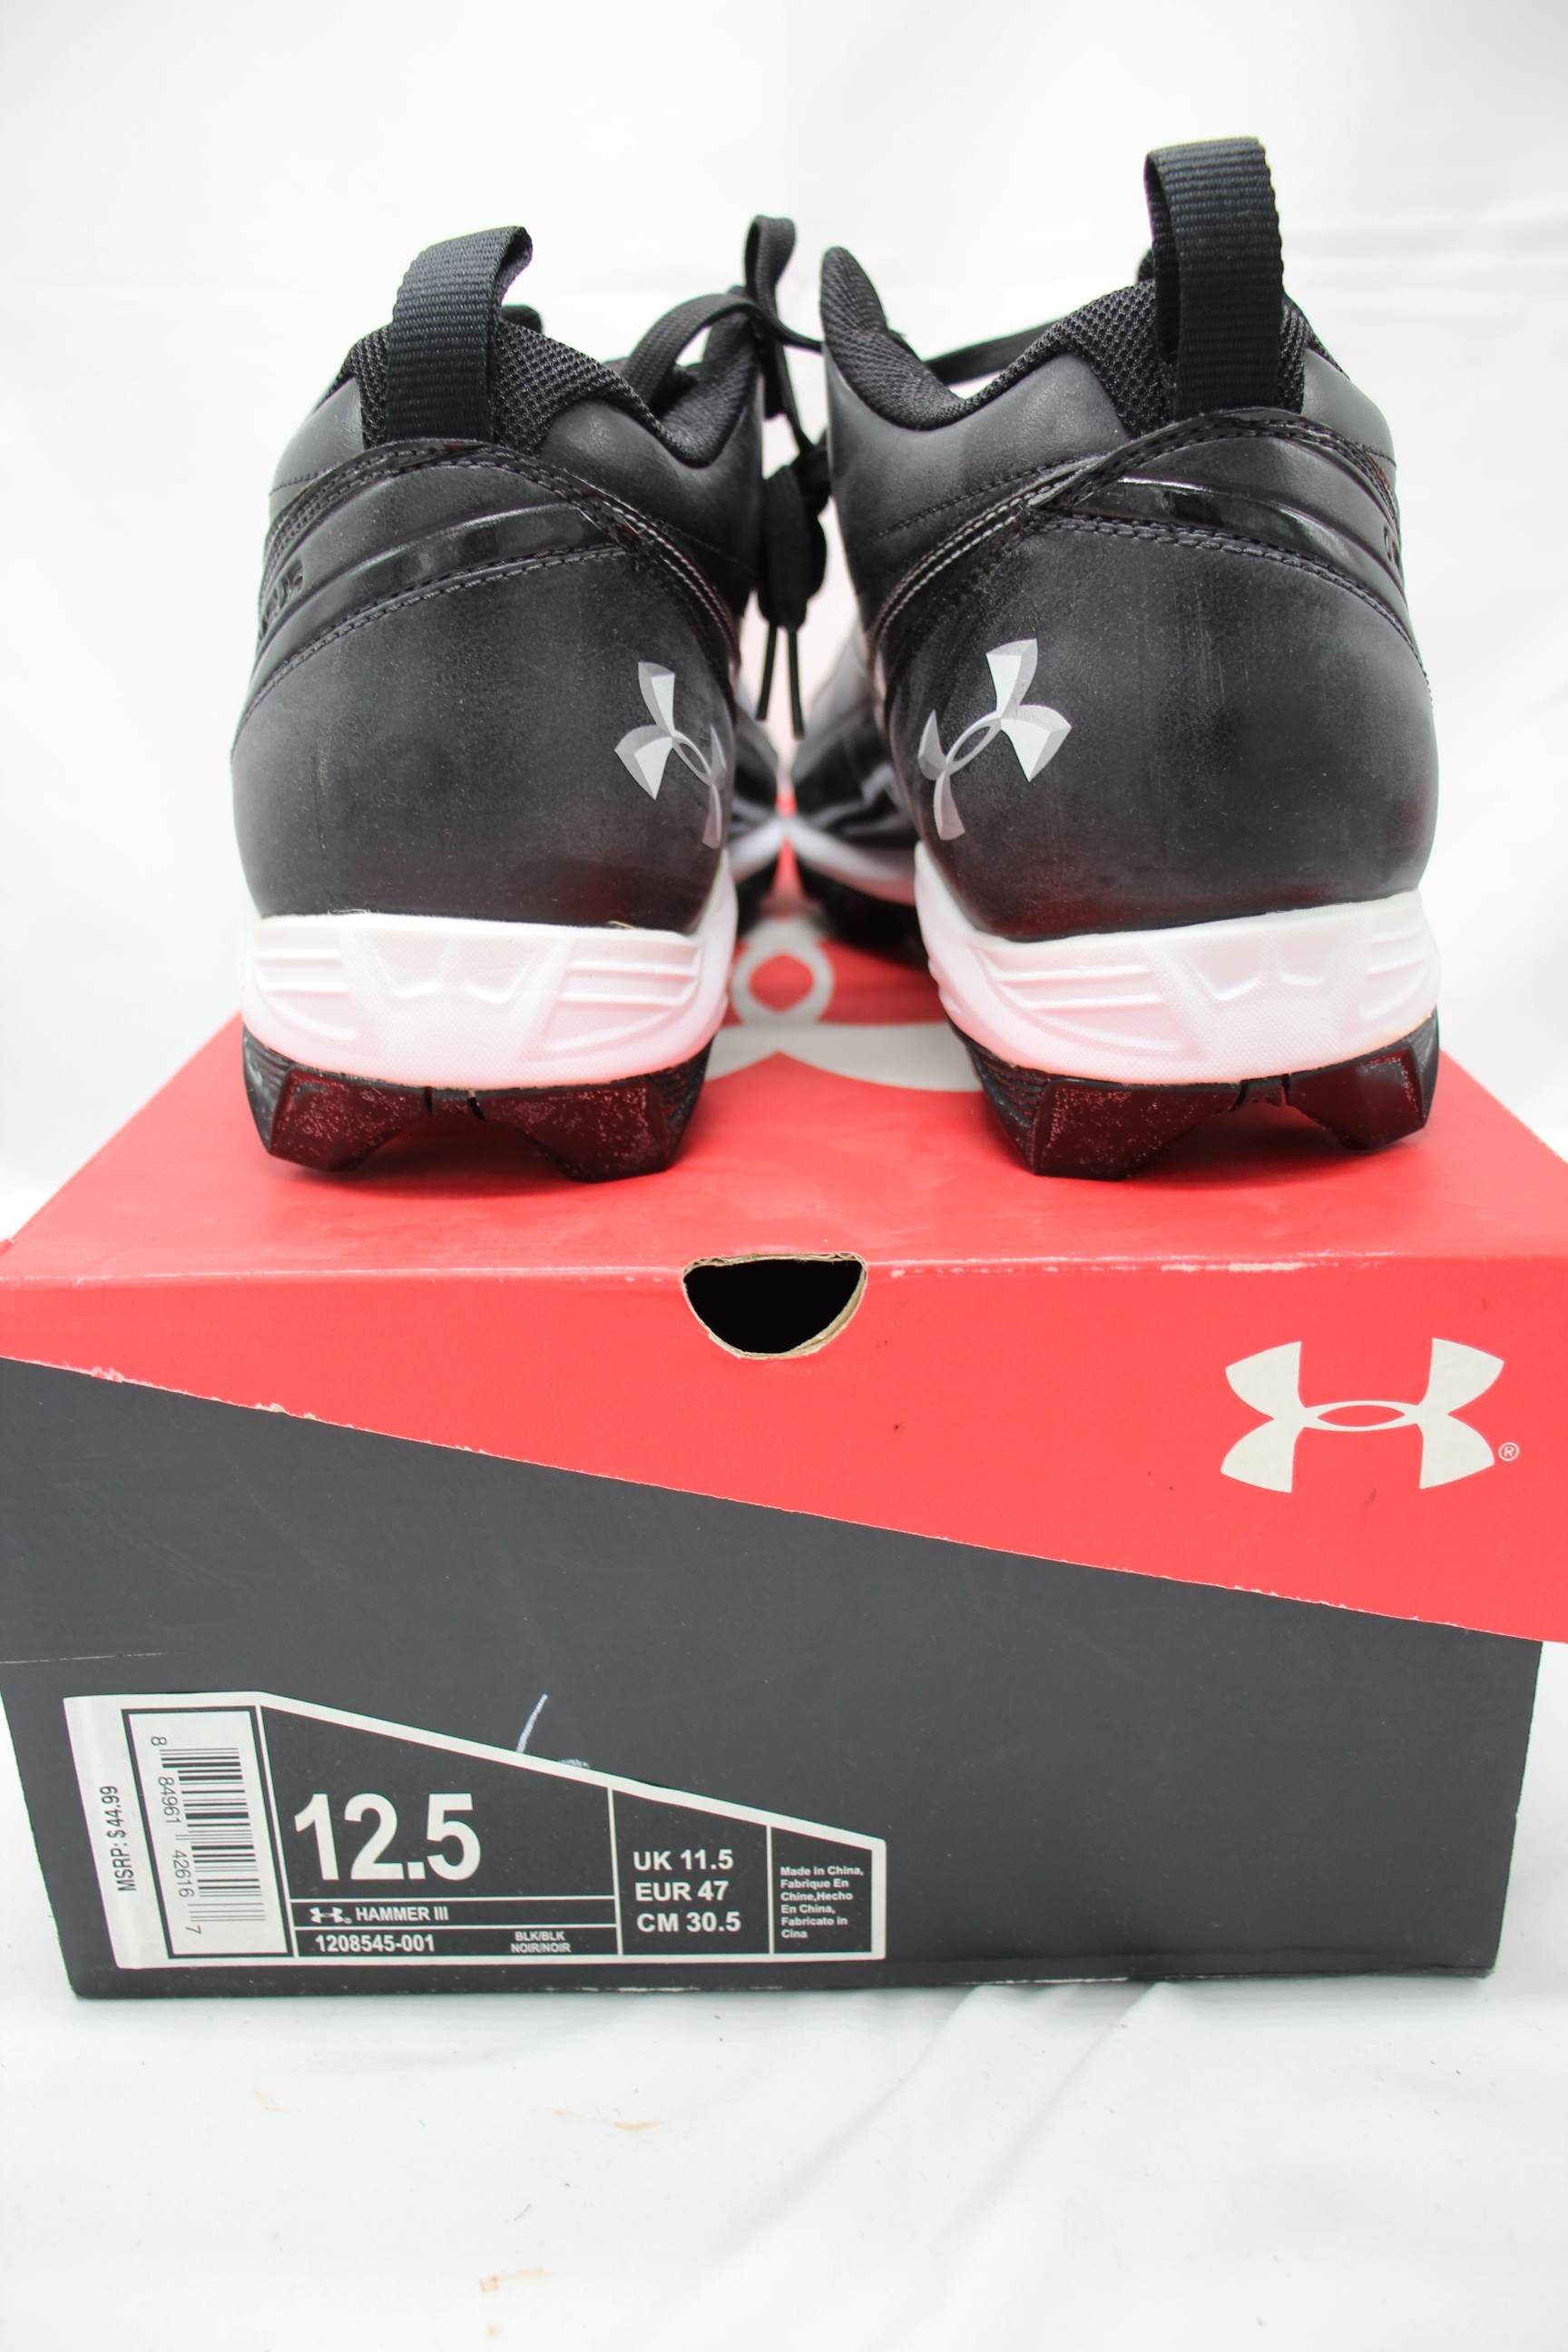 New with box  Size 12.5 (Women's 13.5) Under Armour Mid Top Hammer cleats